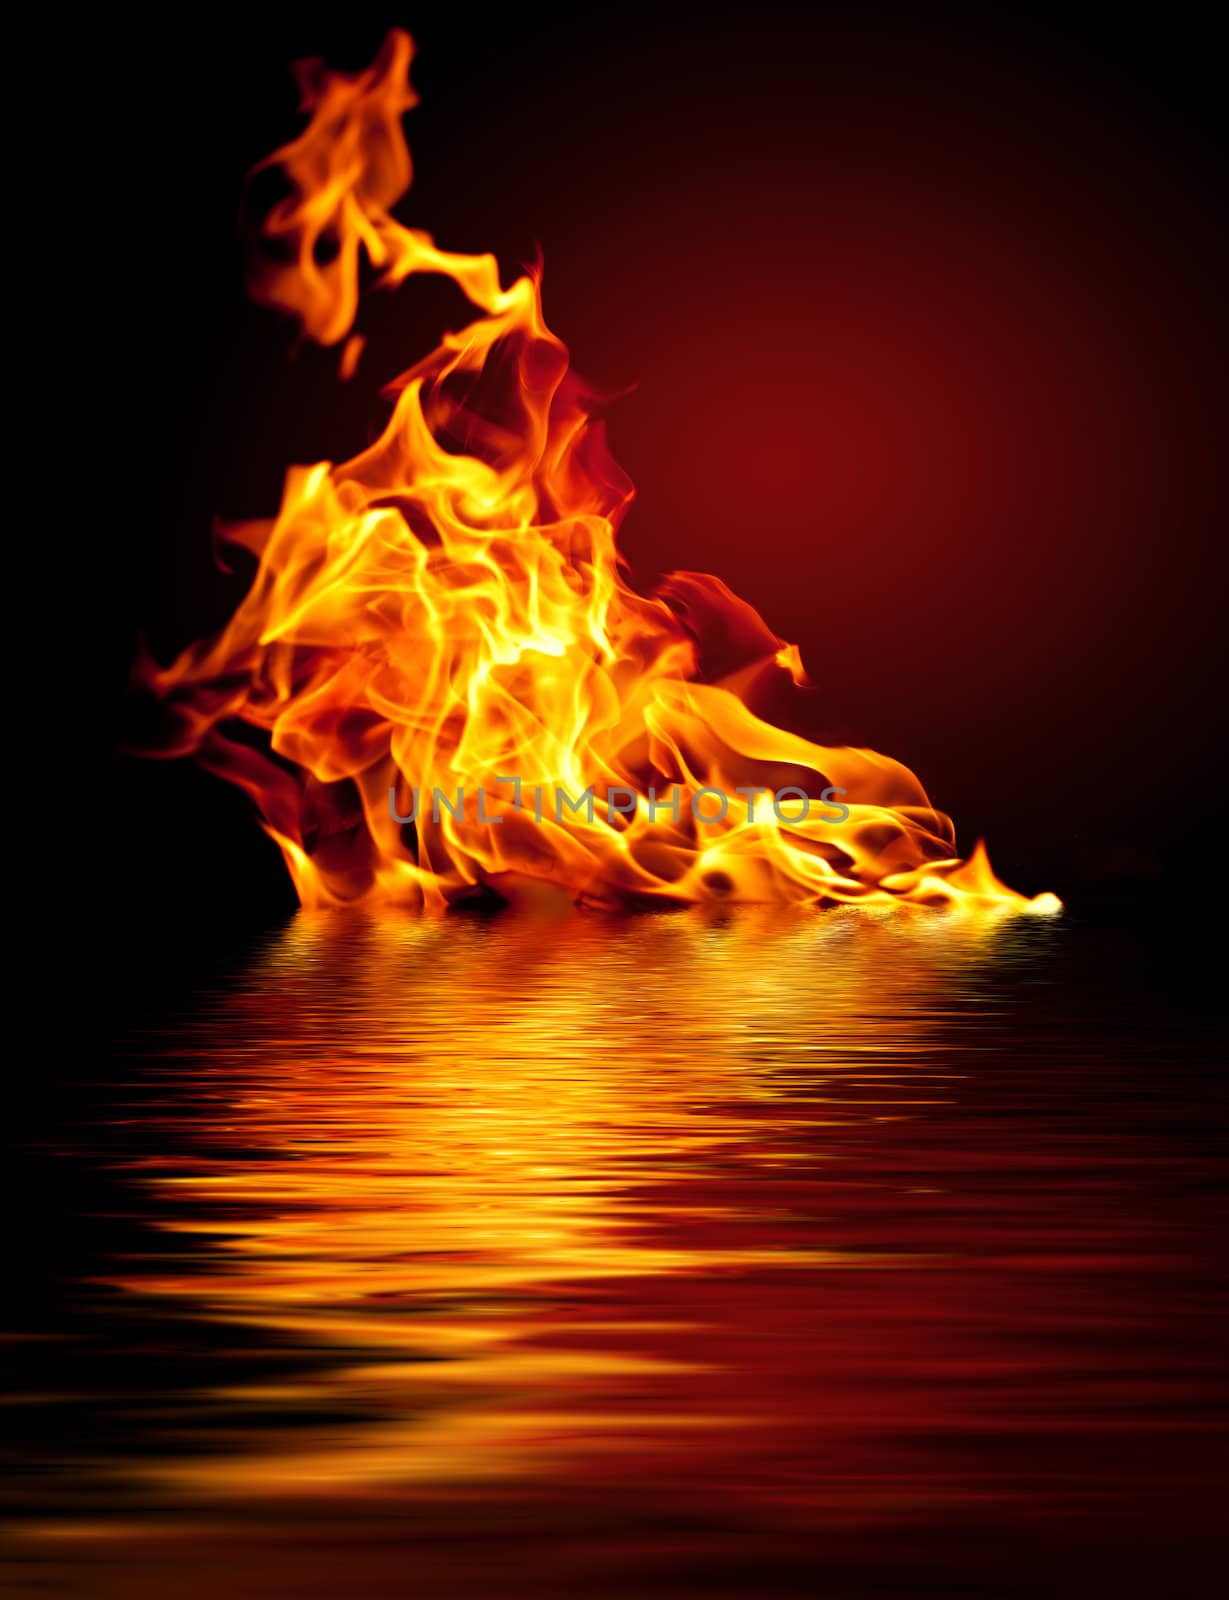 Fire flames and water reflections